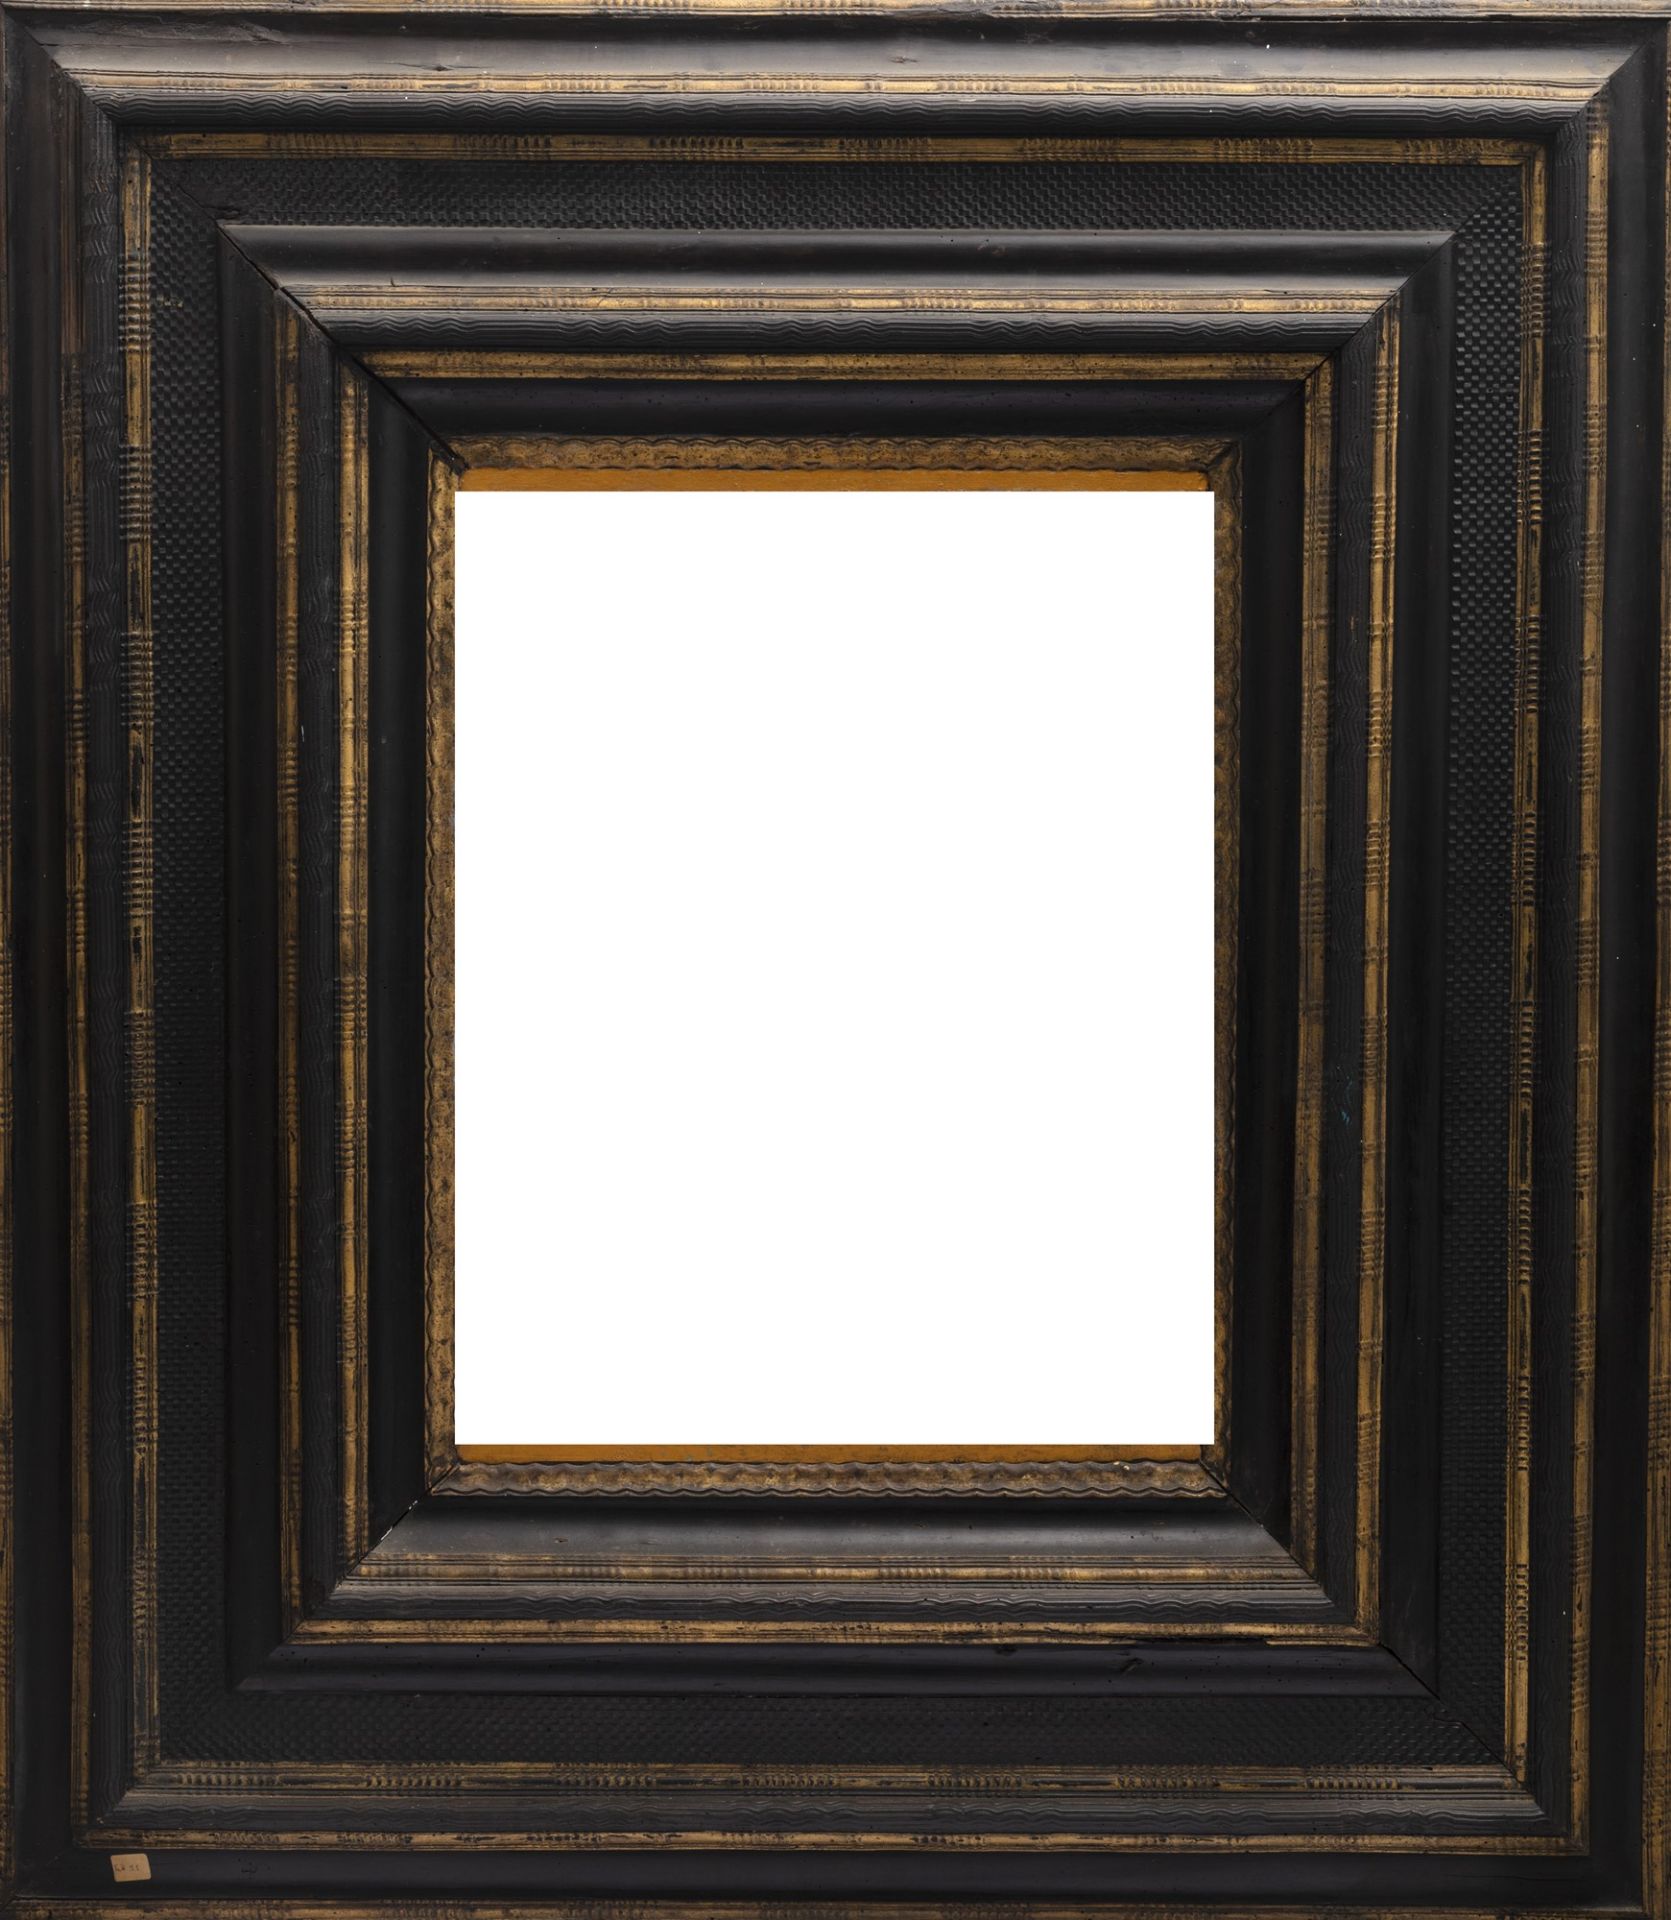 Frame with several orders of carving in ebonized and partially gilded wood, 17th century